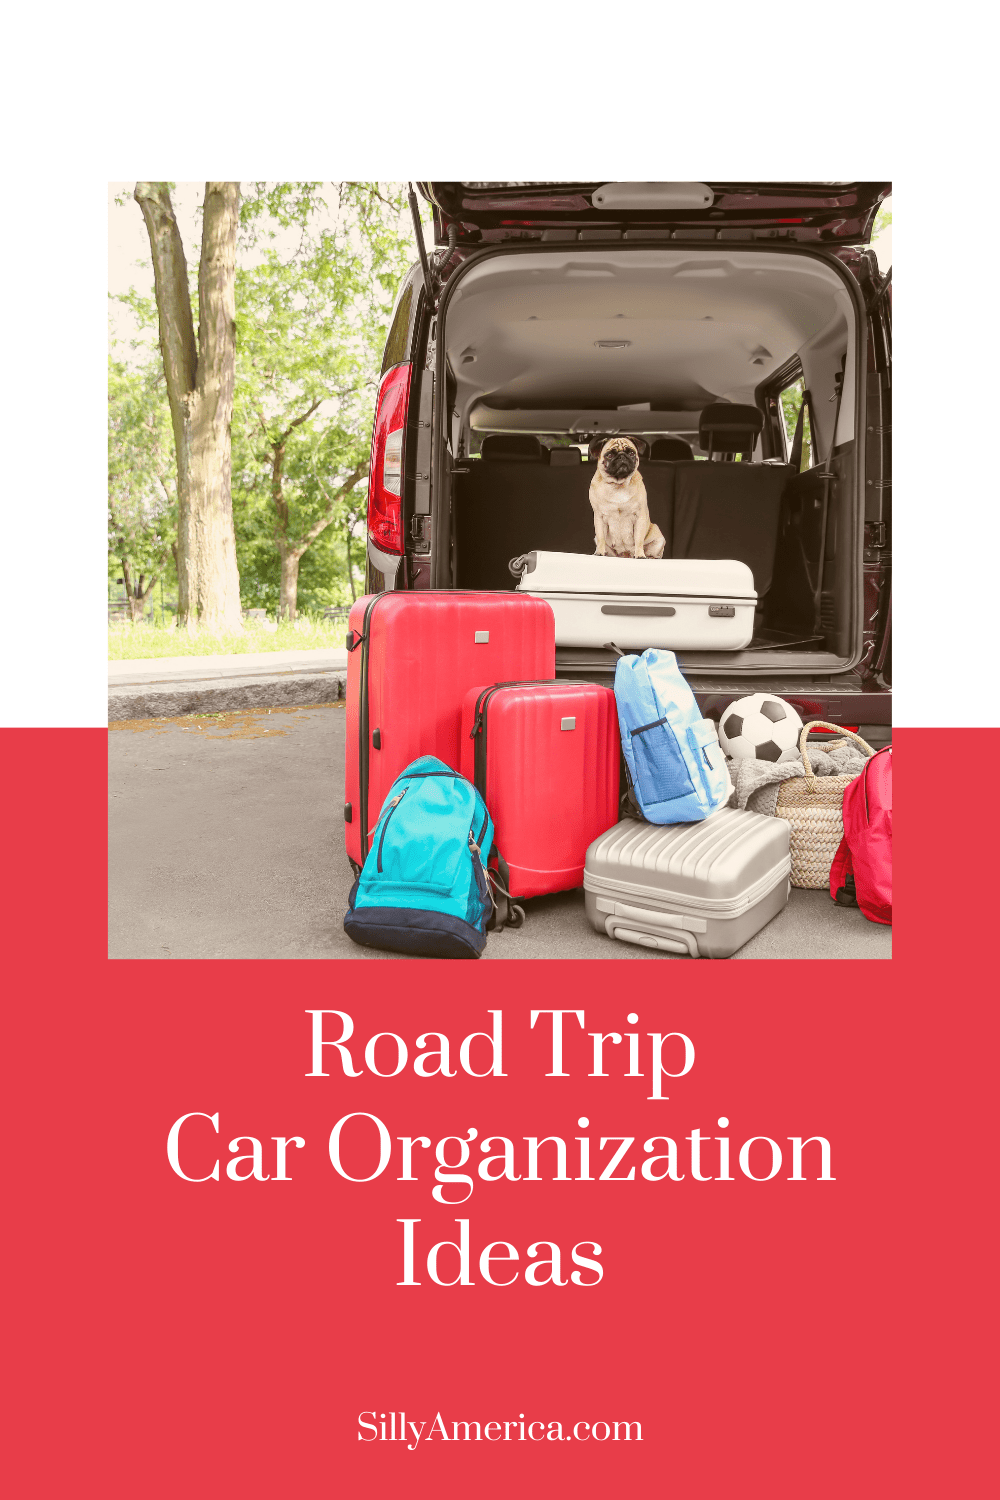 On road trips you always are bringing along a lot of stuff. It is easy for your car to become a disorganized mess, fast. You'll need some road trip car organization accessories to help keep the clutter to a minimum. There are many different options when it comes to road trip car organization ideas. The best ones are what work best for you, your road trip situation, and your car. #RoadTrip #Organization #RoadTripOrganizers #RoadTripOrganization #Organizers